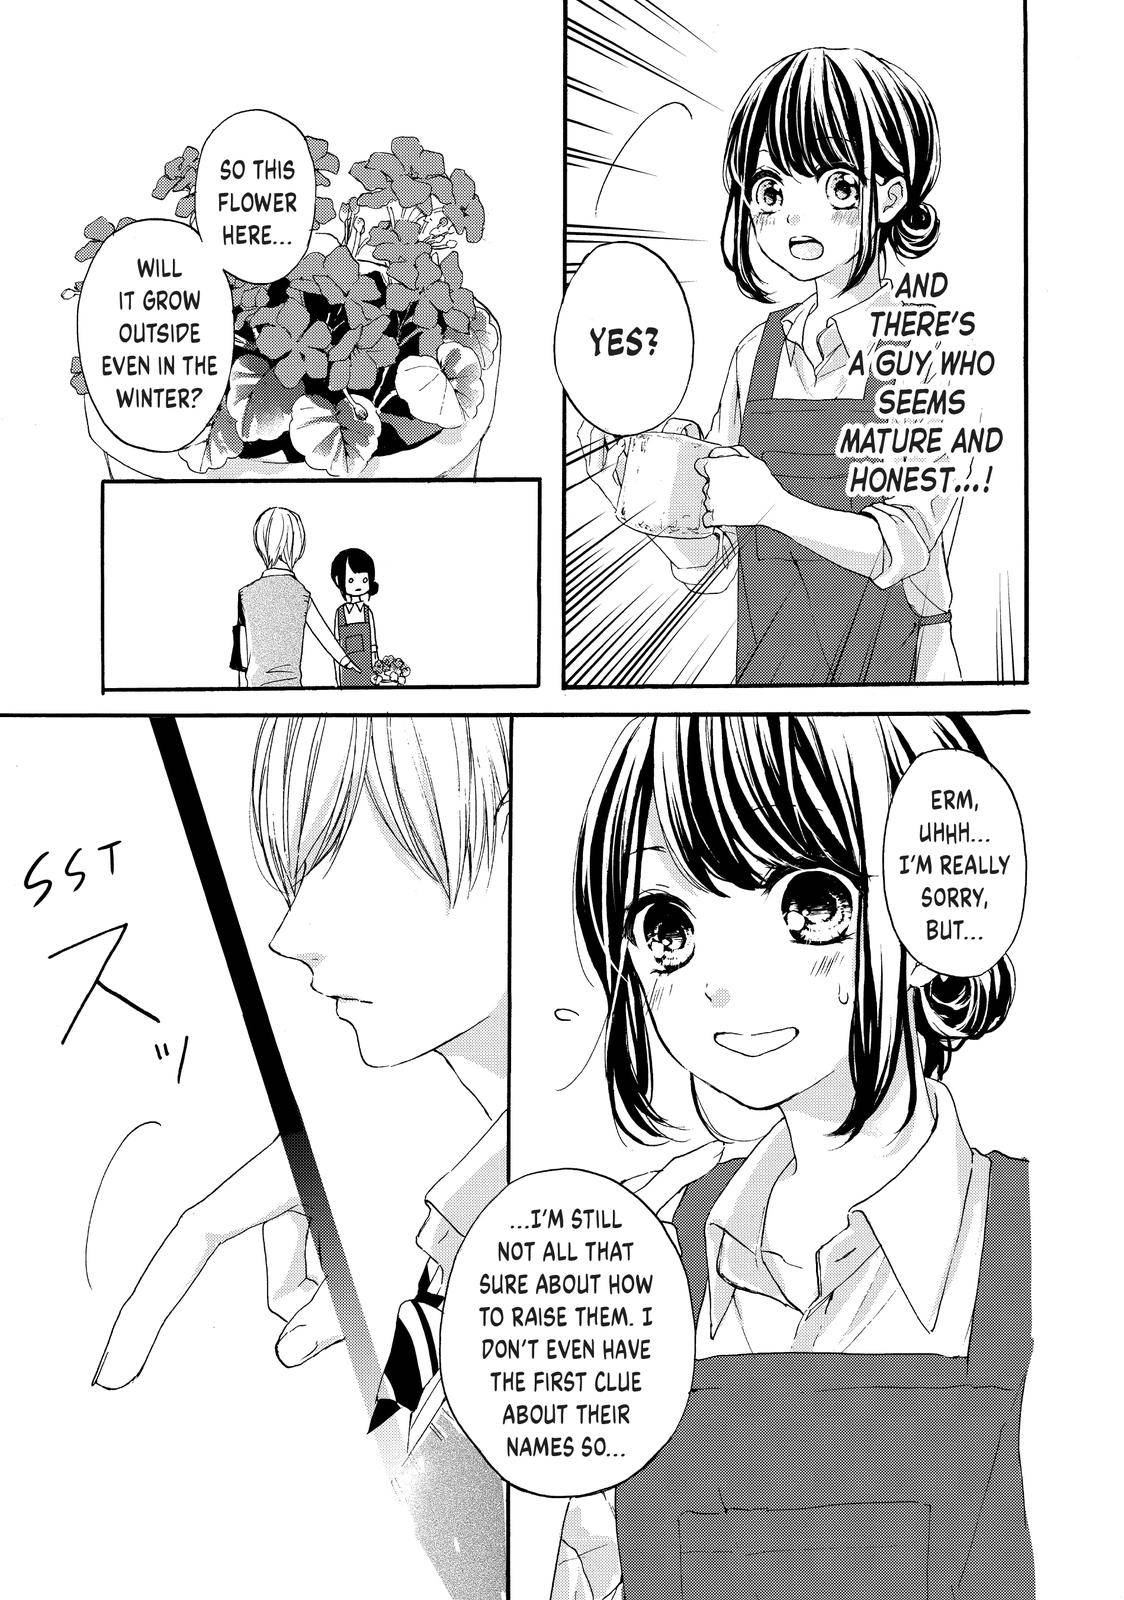 Chihiro-kun Only Has Eyes for Me - chapter 31.5 - #5